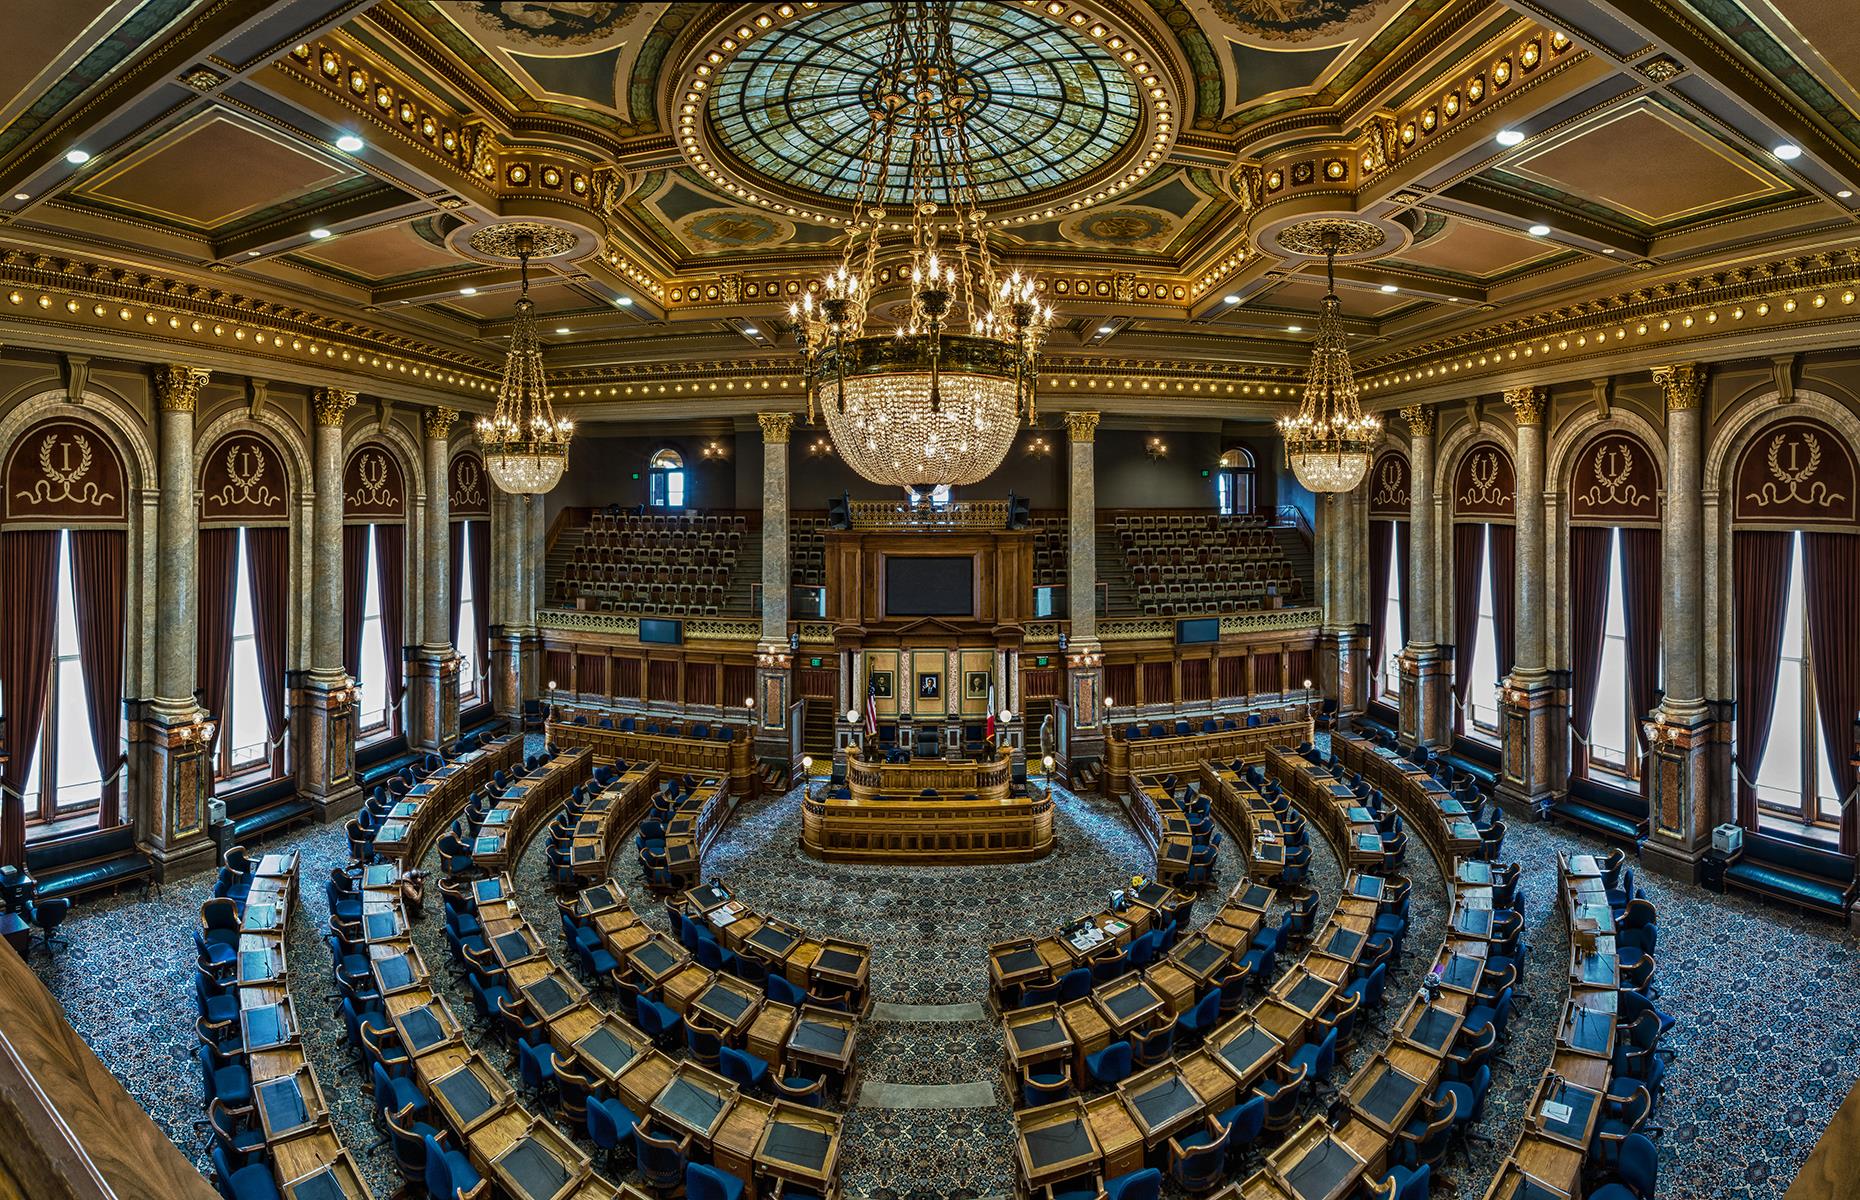 <p><a href="https://www.legis.iowa.gov/resources/tourCapitol">Iowa's ornate state capitol</a> can be found in downtown Des Moines, and it's as informative as it is beautiful. You can explore the historic capital on an independent or guided tour (both are free) and learn about the state's history and the architecture of the building itself. The grounds are also dotted with interesting monuments, including a poignant holocaust memorial. Note that opening hours are <a href="https://www.legis.iowa.gov/docs/publications/CT/794834.pdf">subject to flux</a> due to COVID-19. </p>